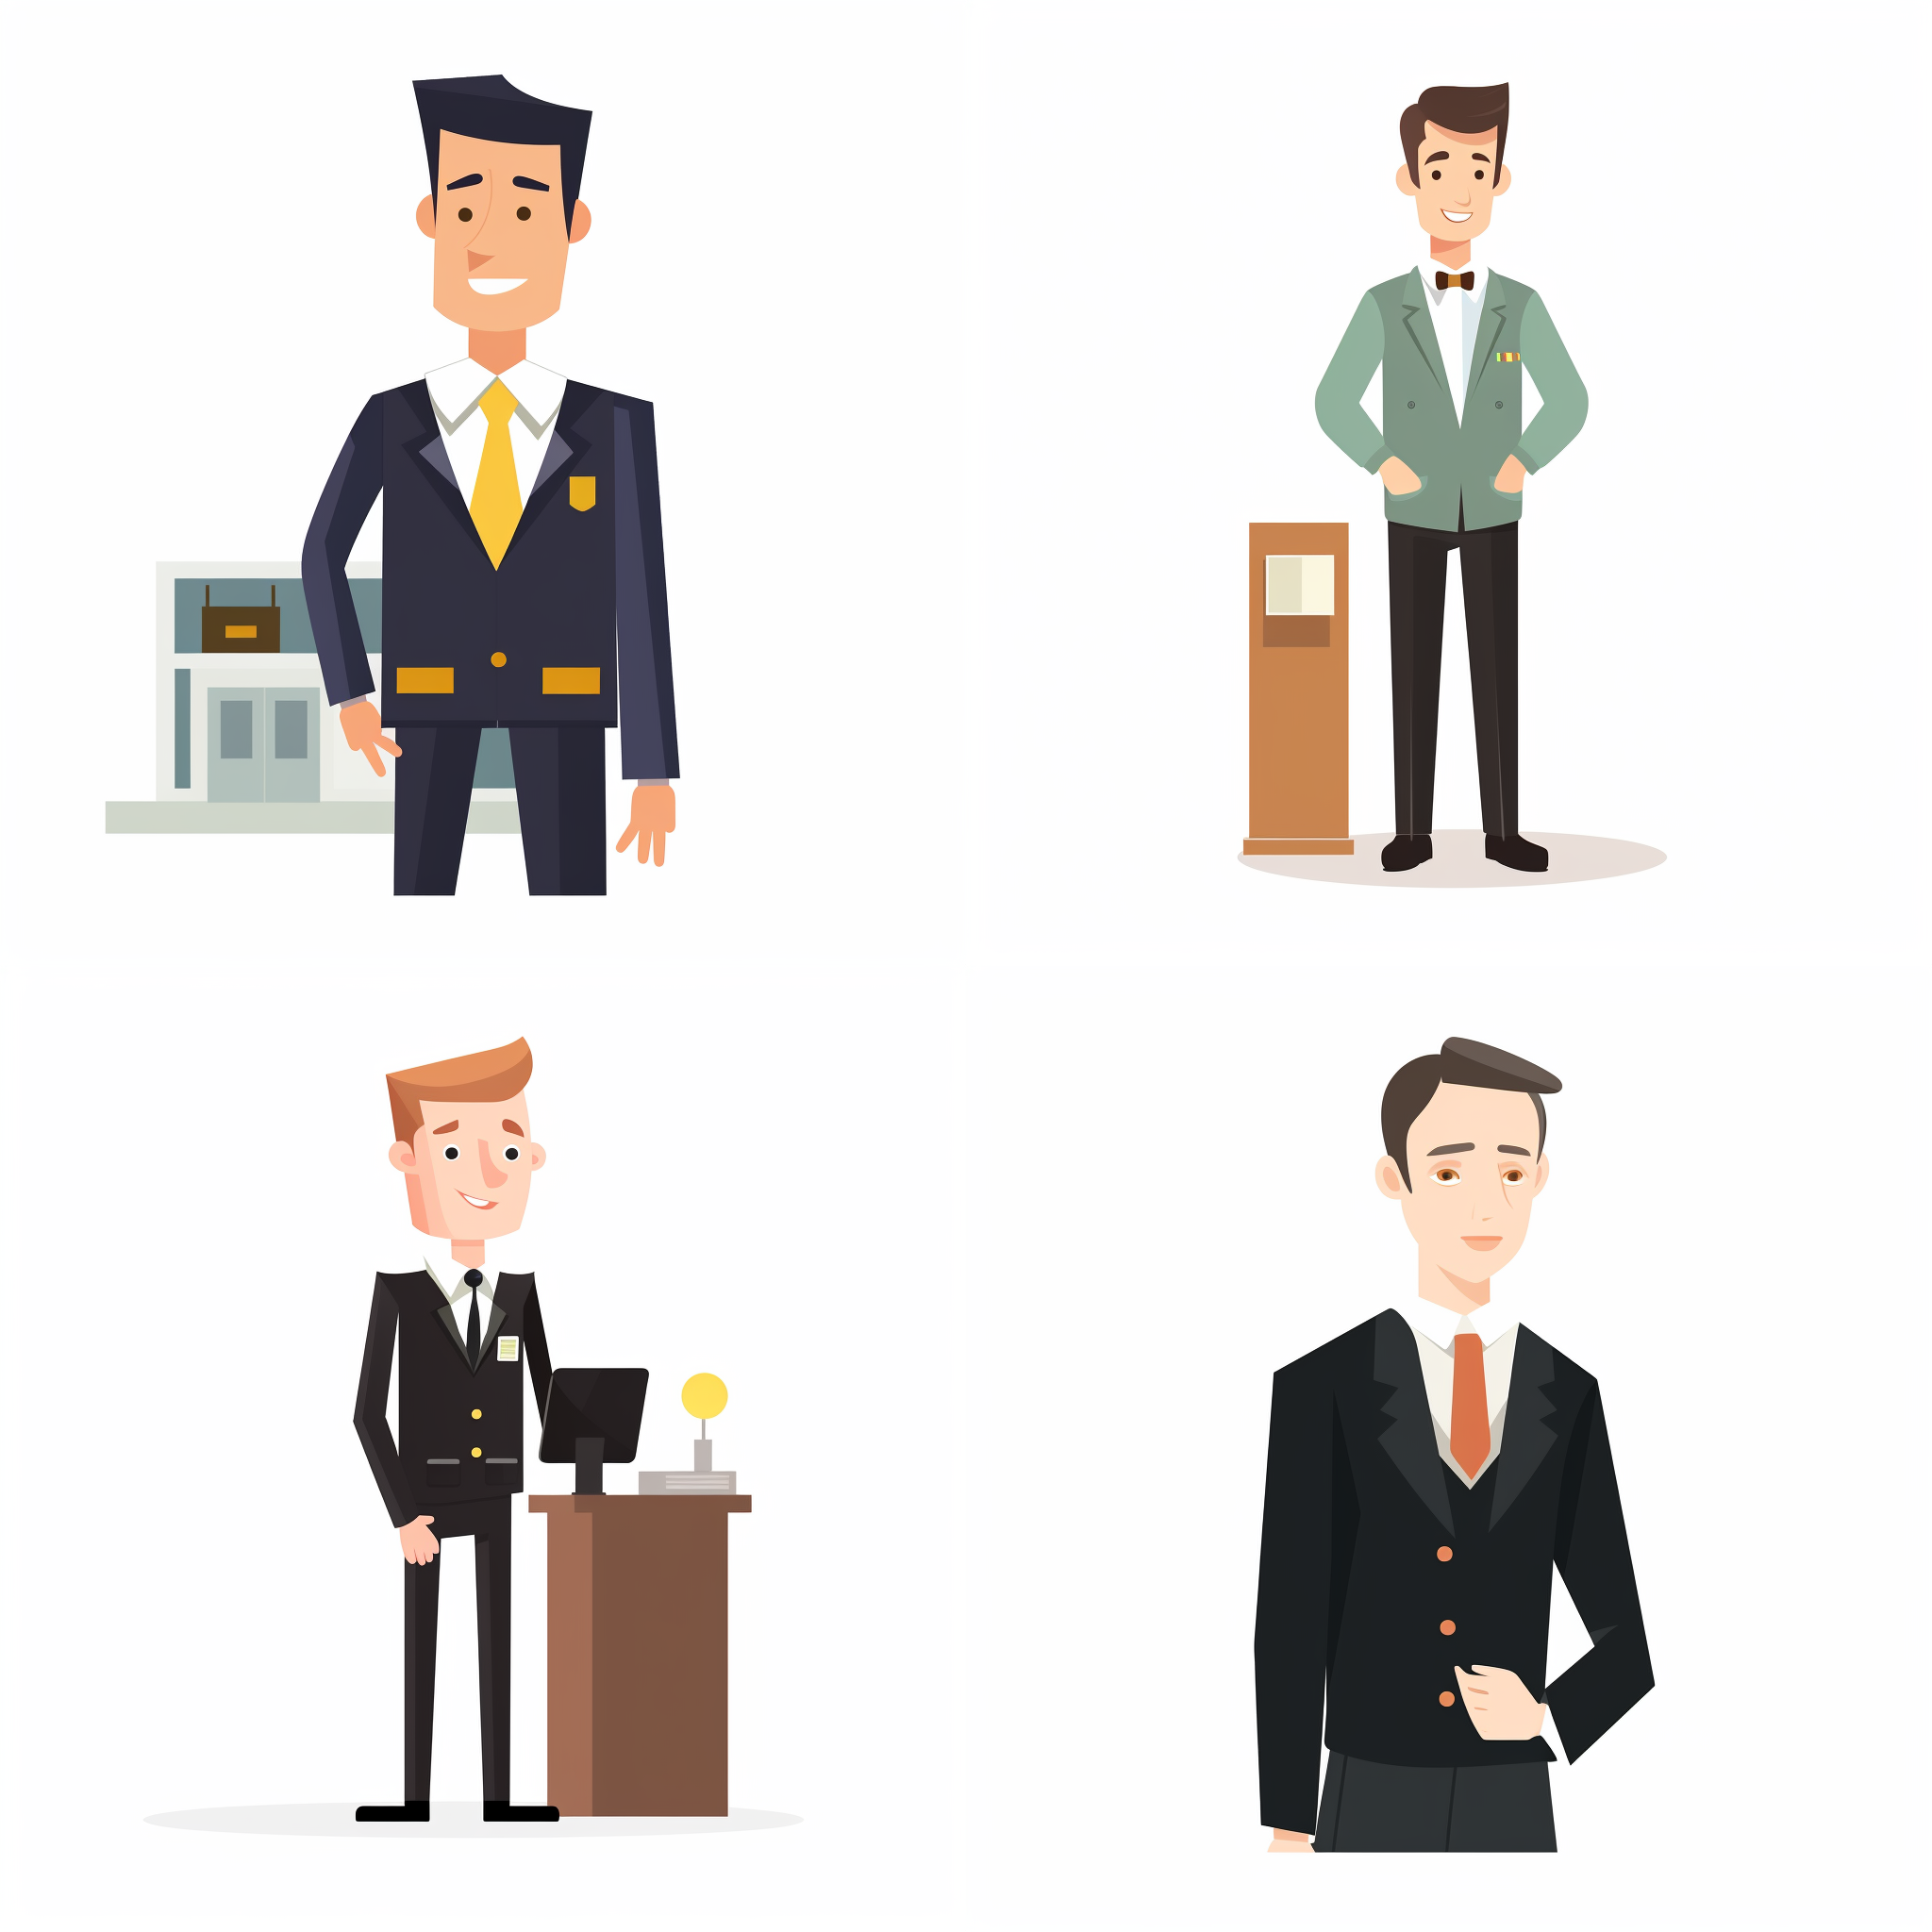 colorvivo hotel manager asset 2d flat vector graphics white bac 095617b4 e4c0 4c52 a5ca 597066884a95 1